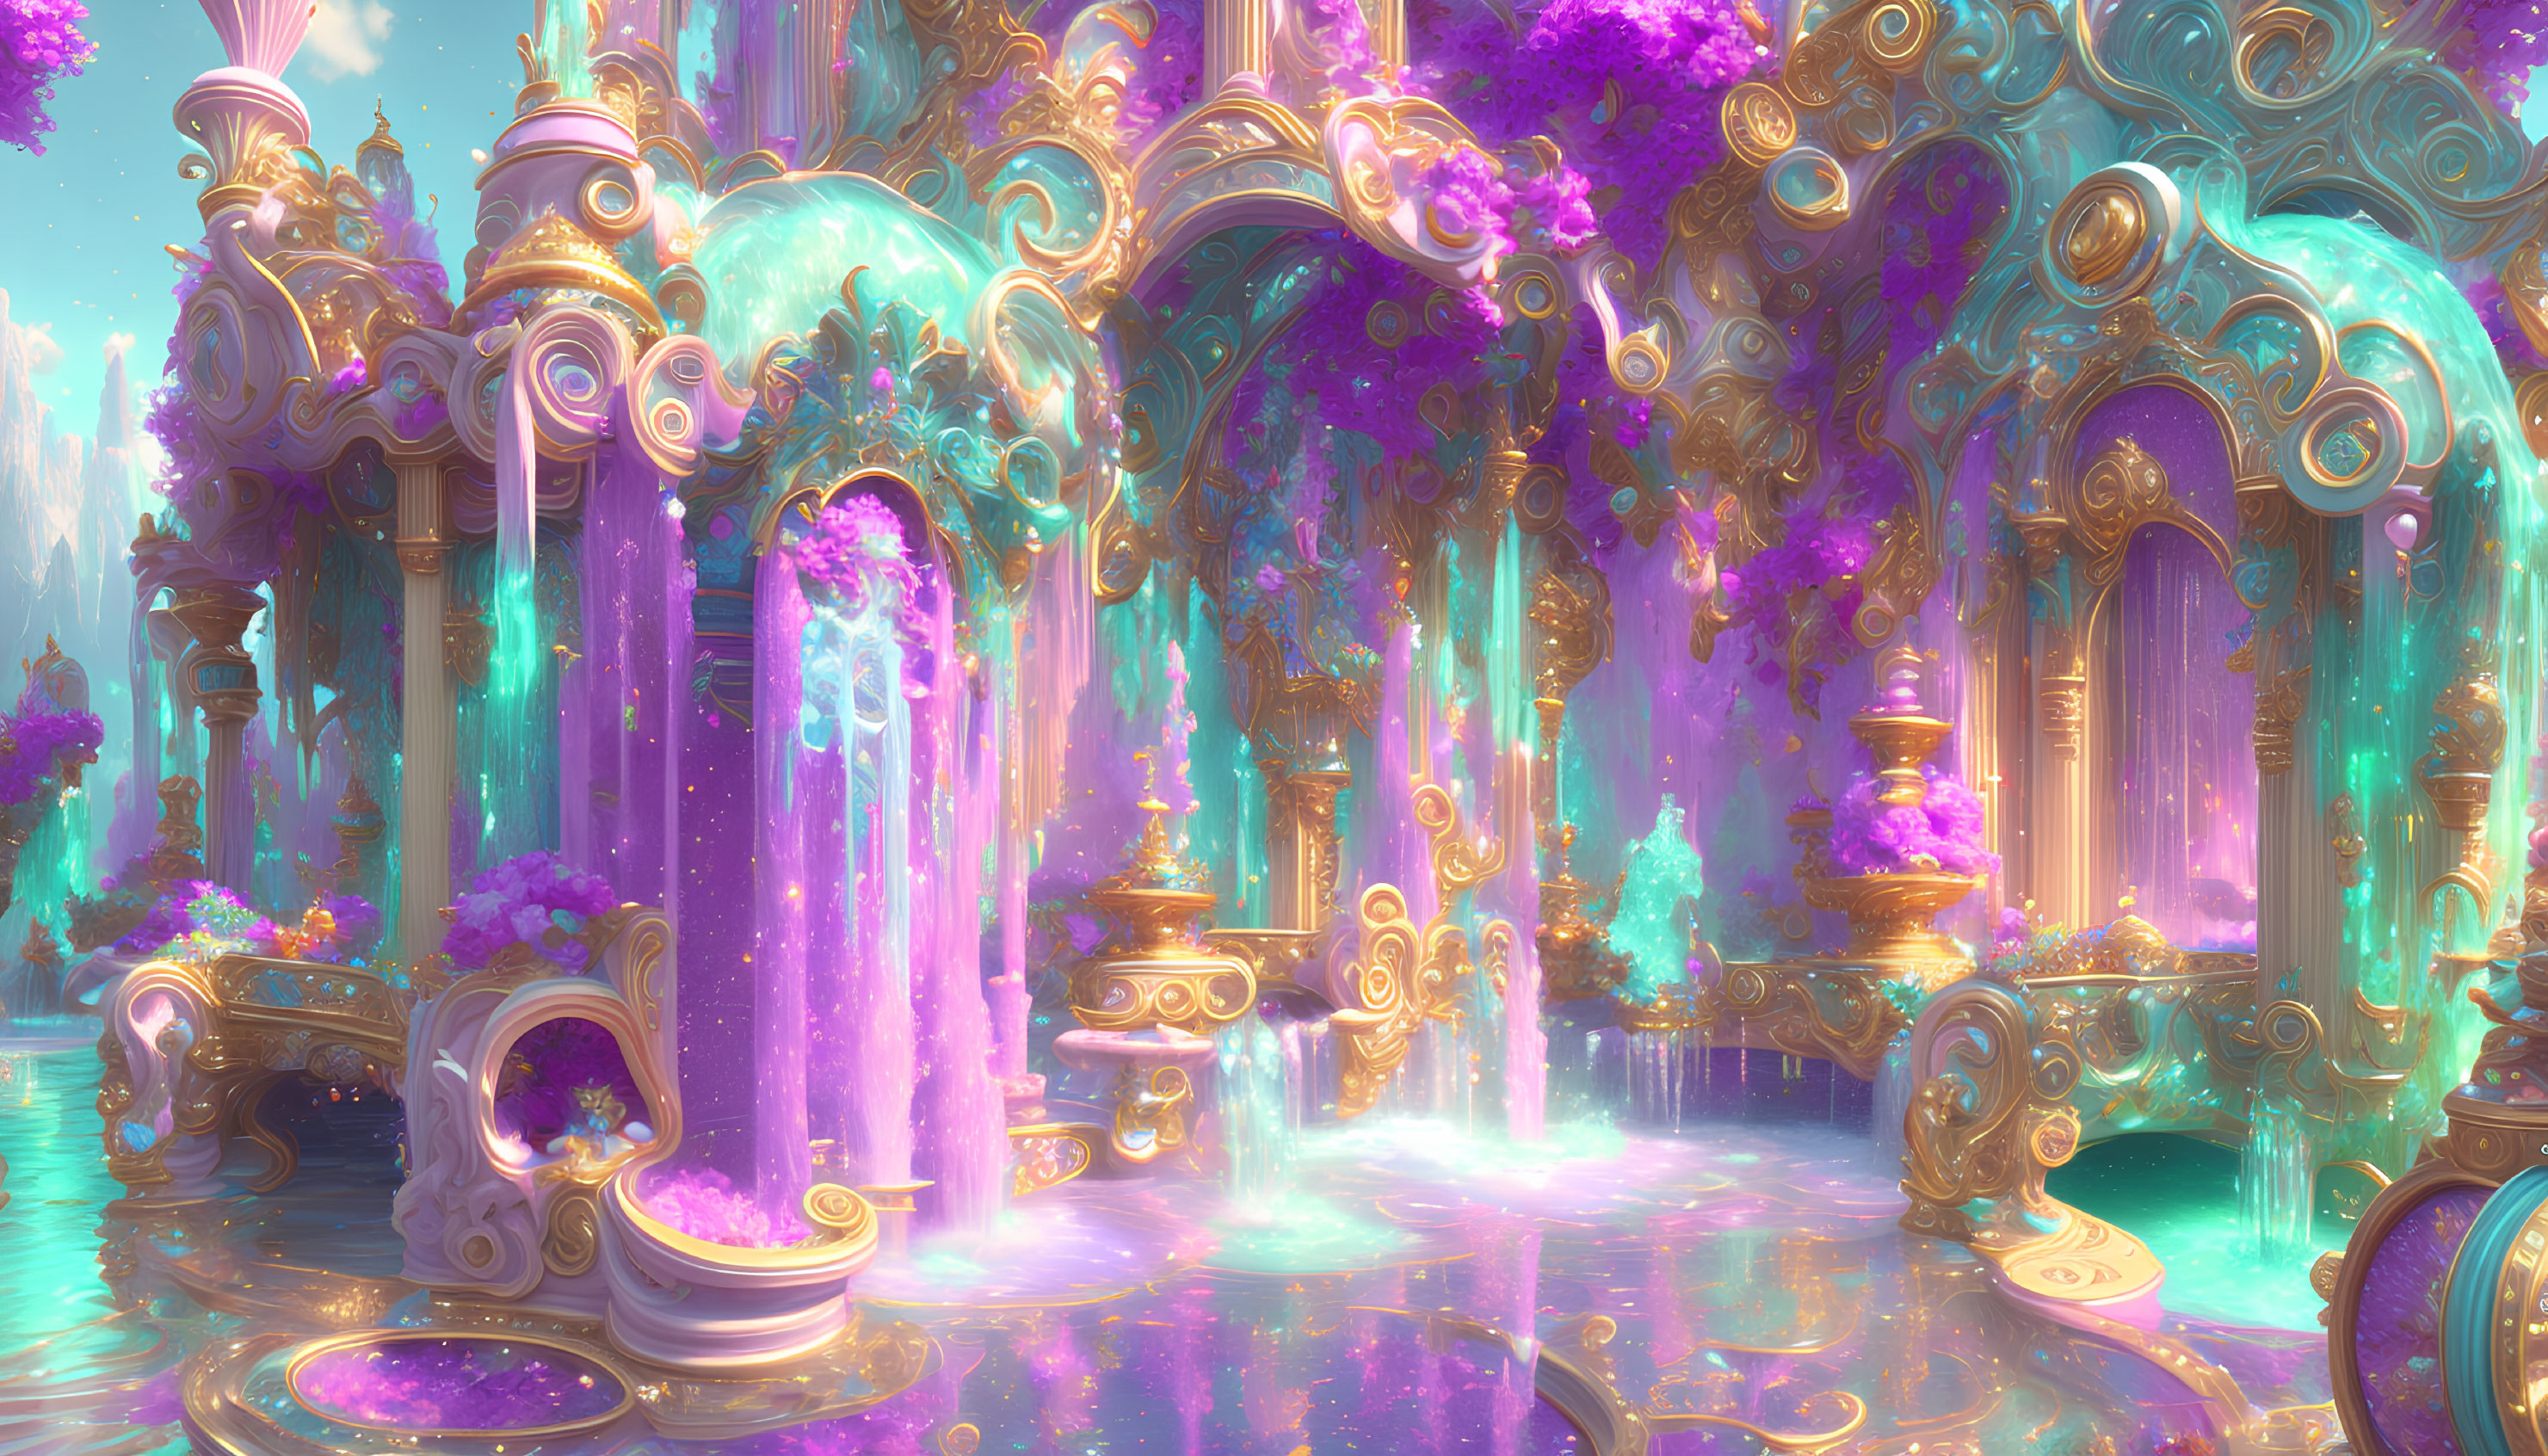 Surreal palace with golden and purple architecture, waterfalls, and glowing light